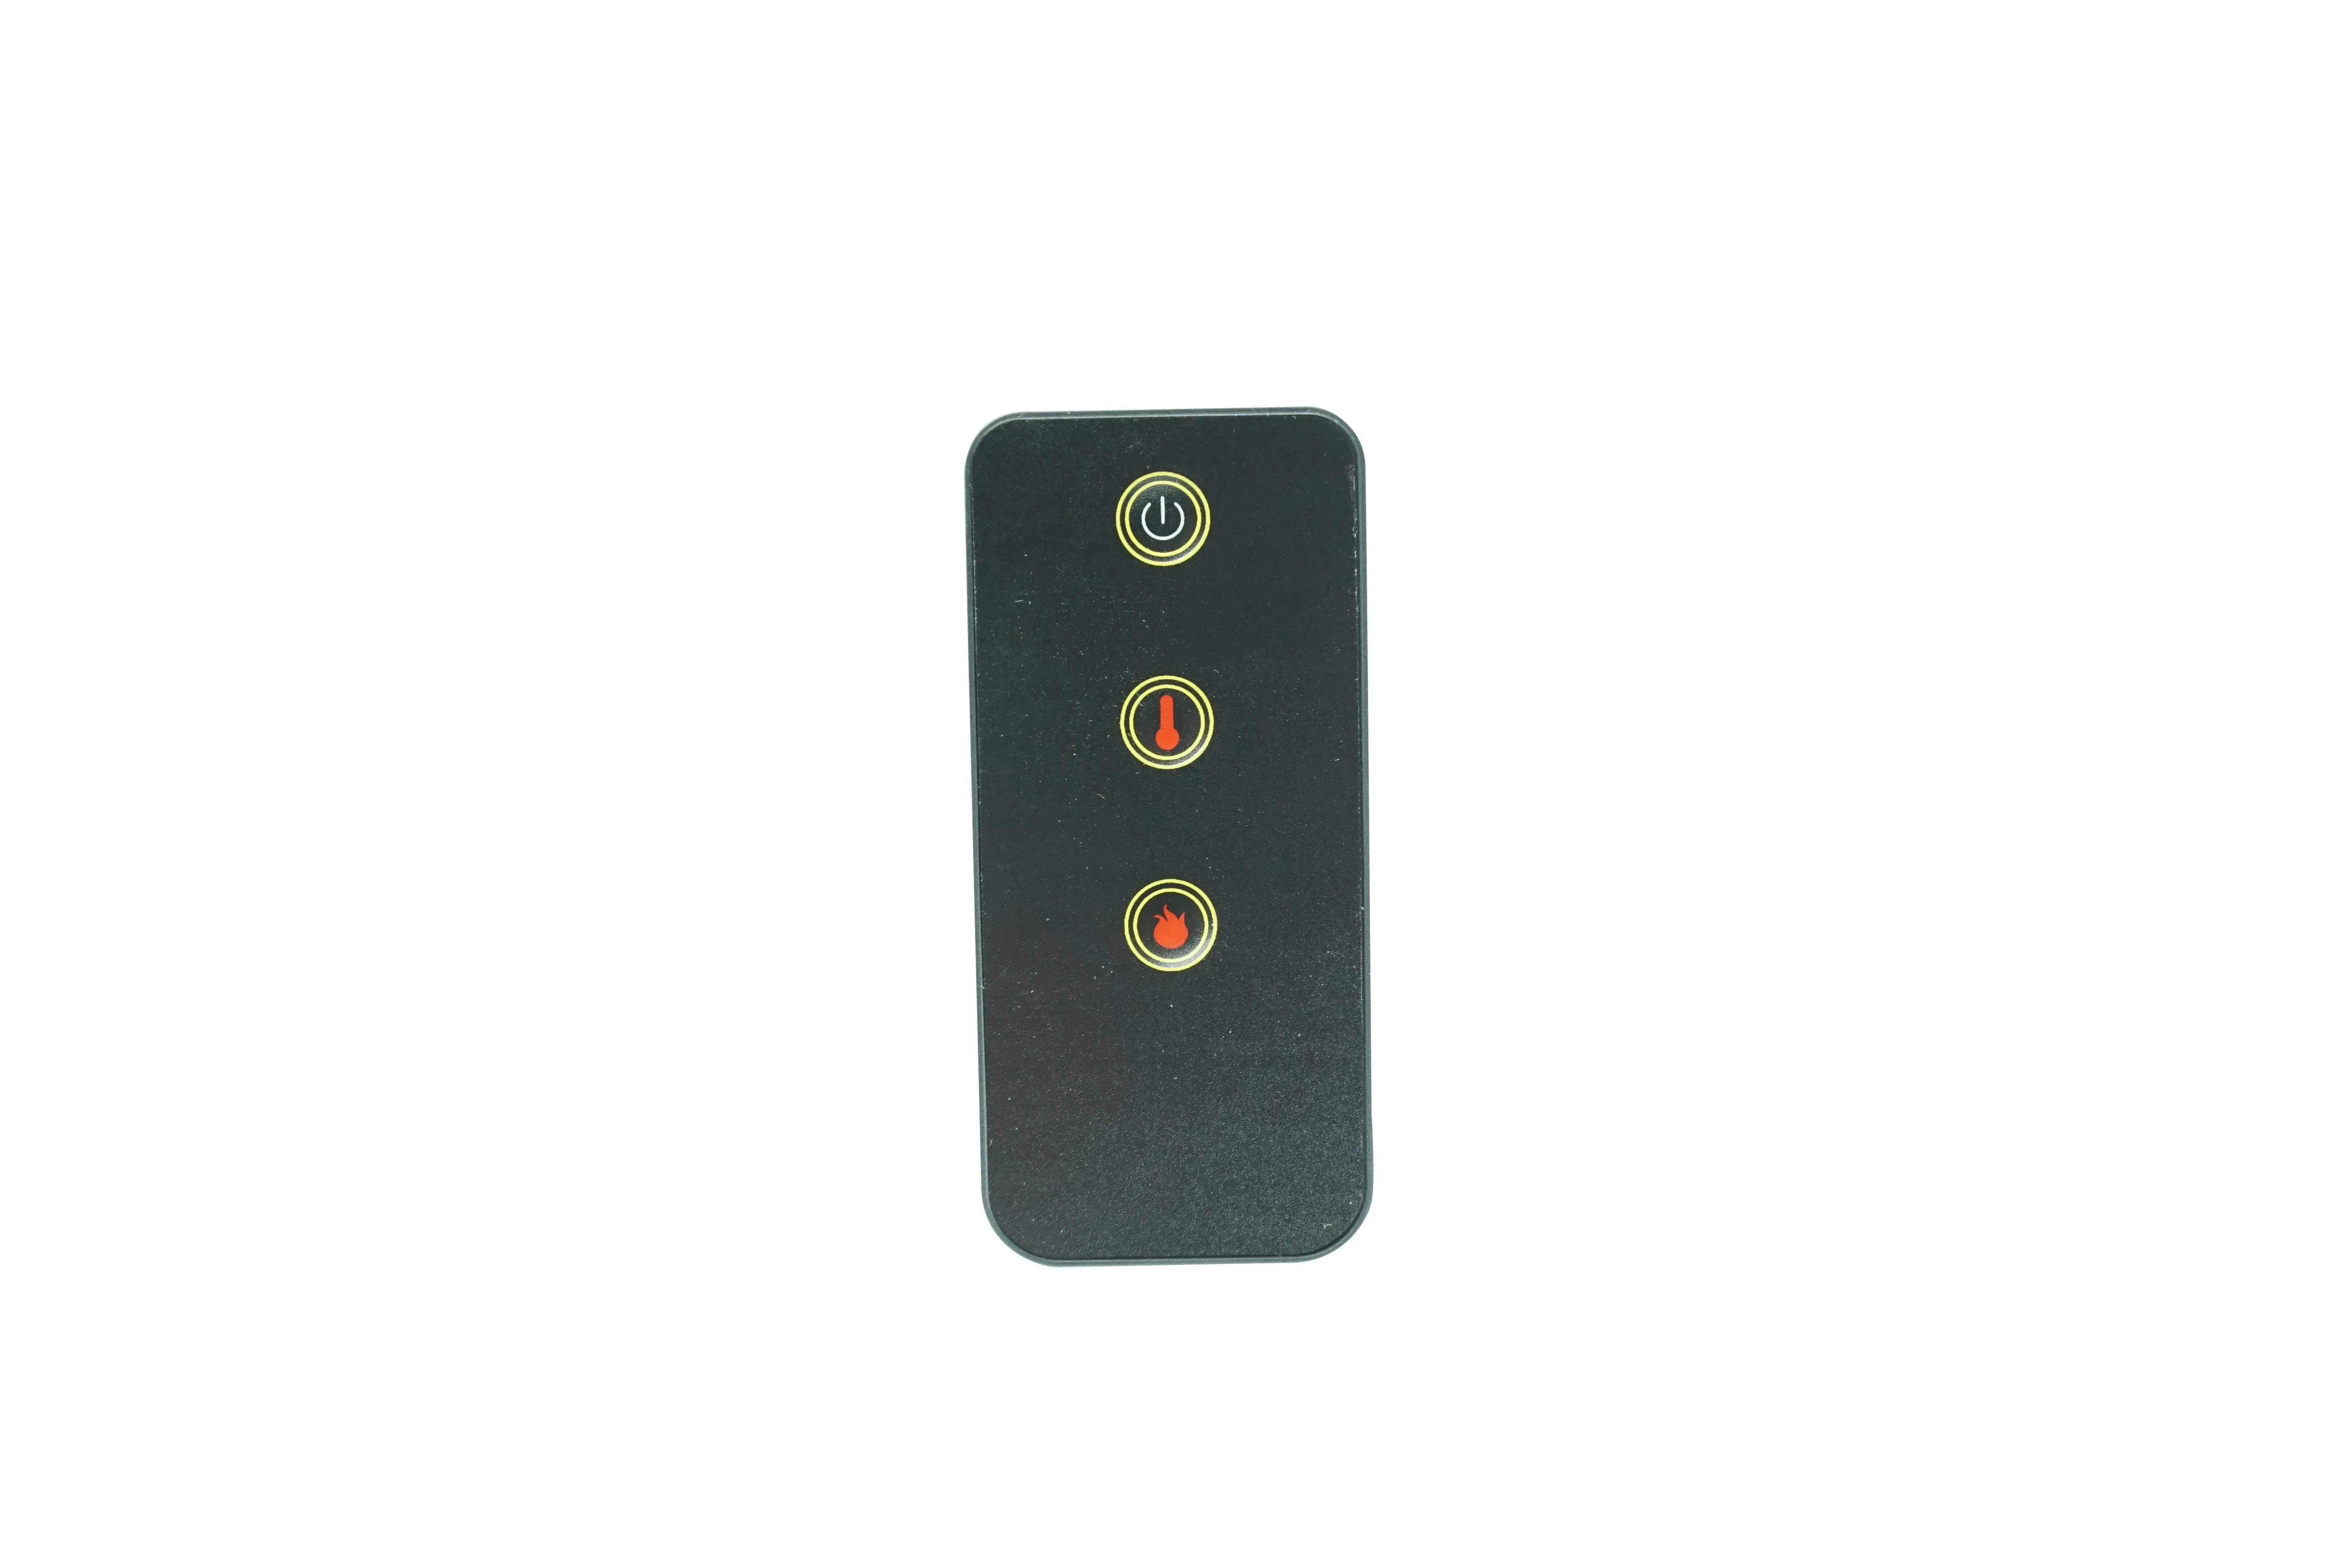 Remote Control For HAMPTON BAY 25-791-68-Y 25-791-50-Y 205107914 205107911 3D Electric Firebox Indoor Fireplace Heater